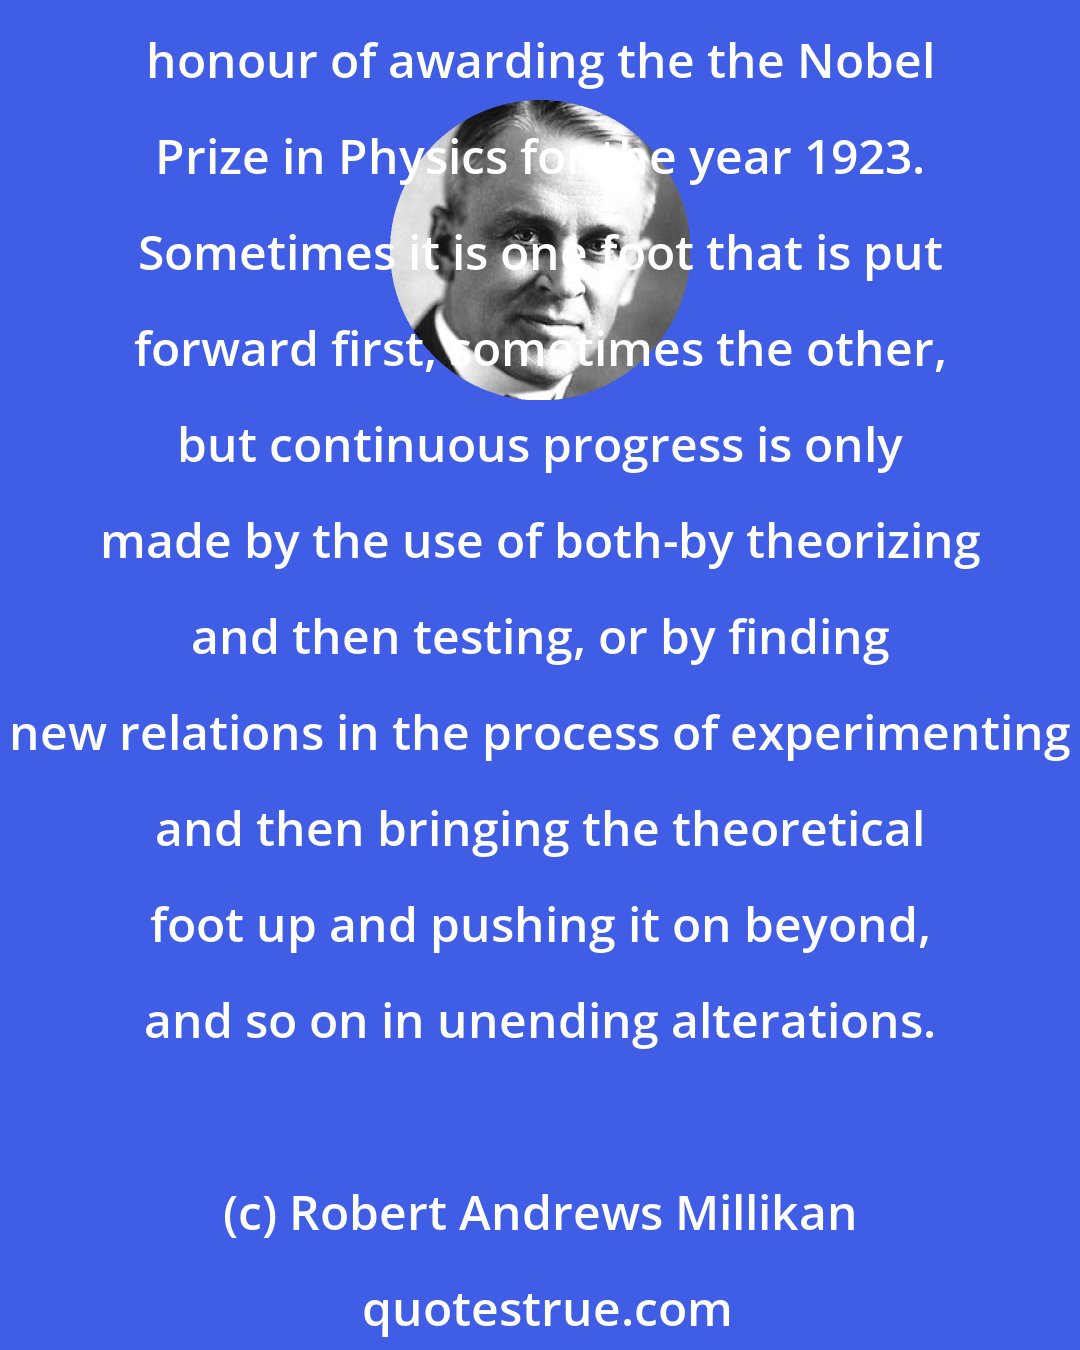 Robert Andrews Millikan: The fact that Science walks forward on two feet, namely theory and experiment, is nowhere better illustrated than in the two fields for slight contributions to which you have done me the great honour of awarding the the Nobel Prize in Physics for the year 1923. Sometimes it is one foot that is put forward first, sometimes the other, but continuous progress is only made by the use of both-by theorizing and then testing, or by finding new relations in the process of experimenting and then bringing the theoretical foot up and pushing it on beyond, and so on in unending alterations.